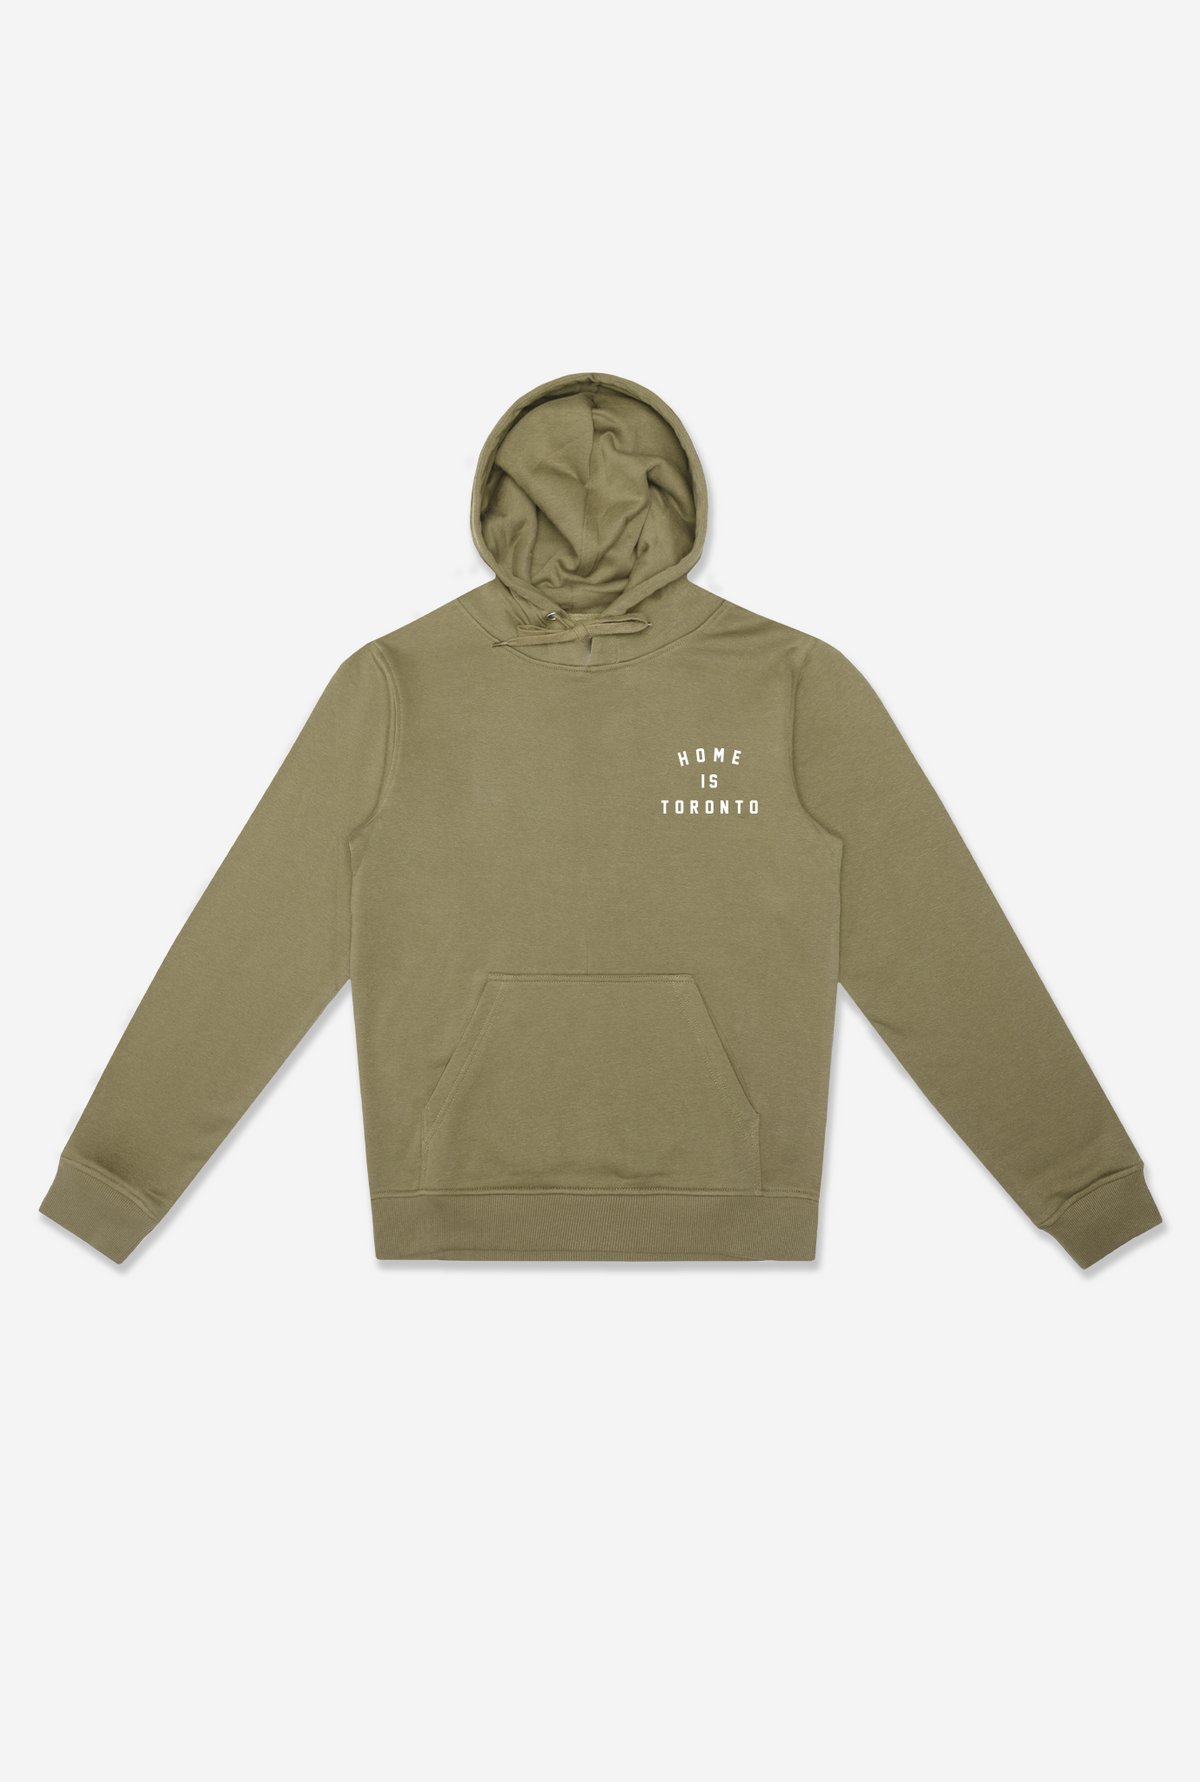 Home is Toronto Crescent Hoodie - Olive